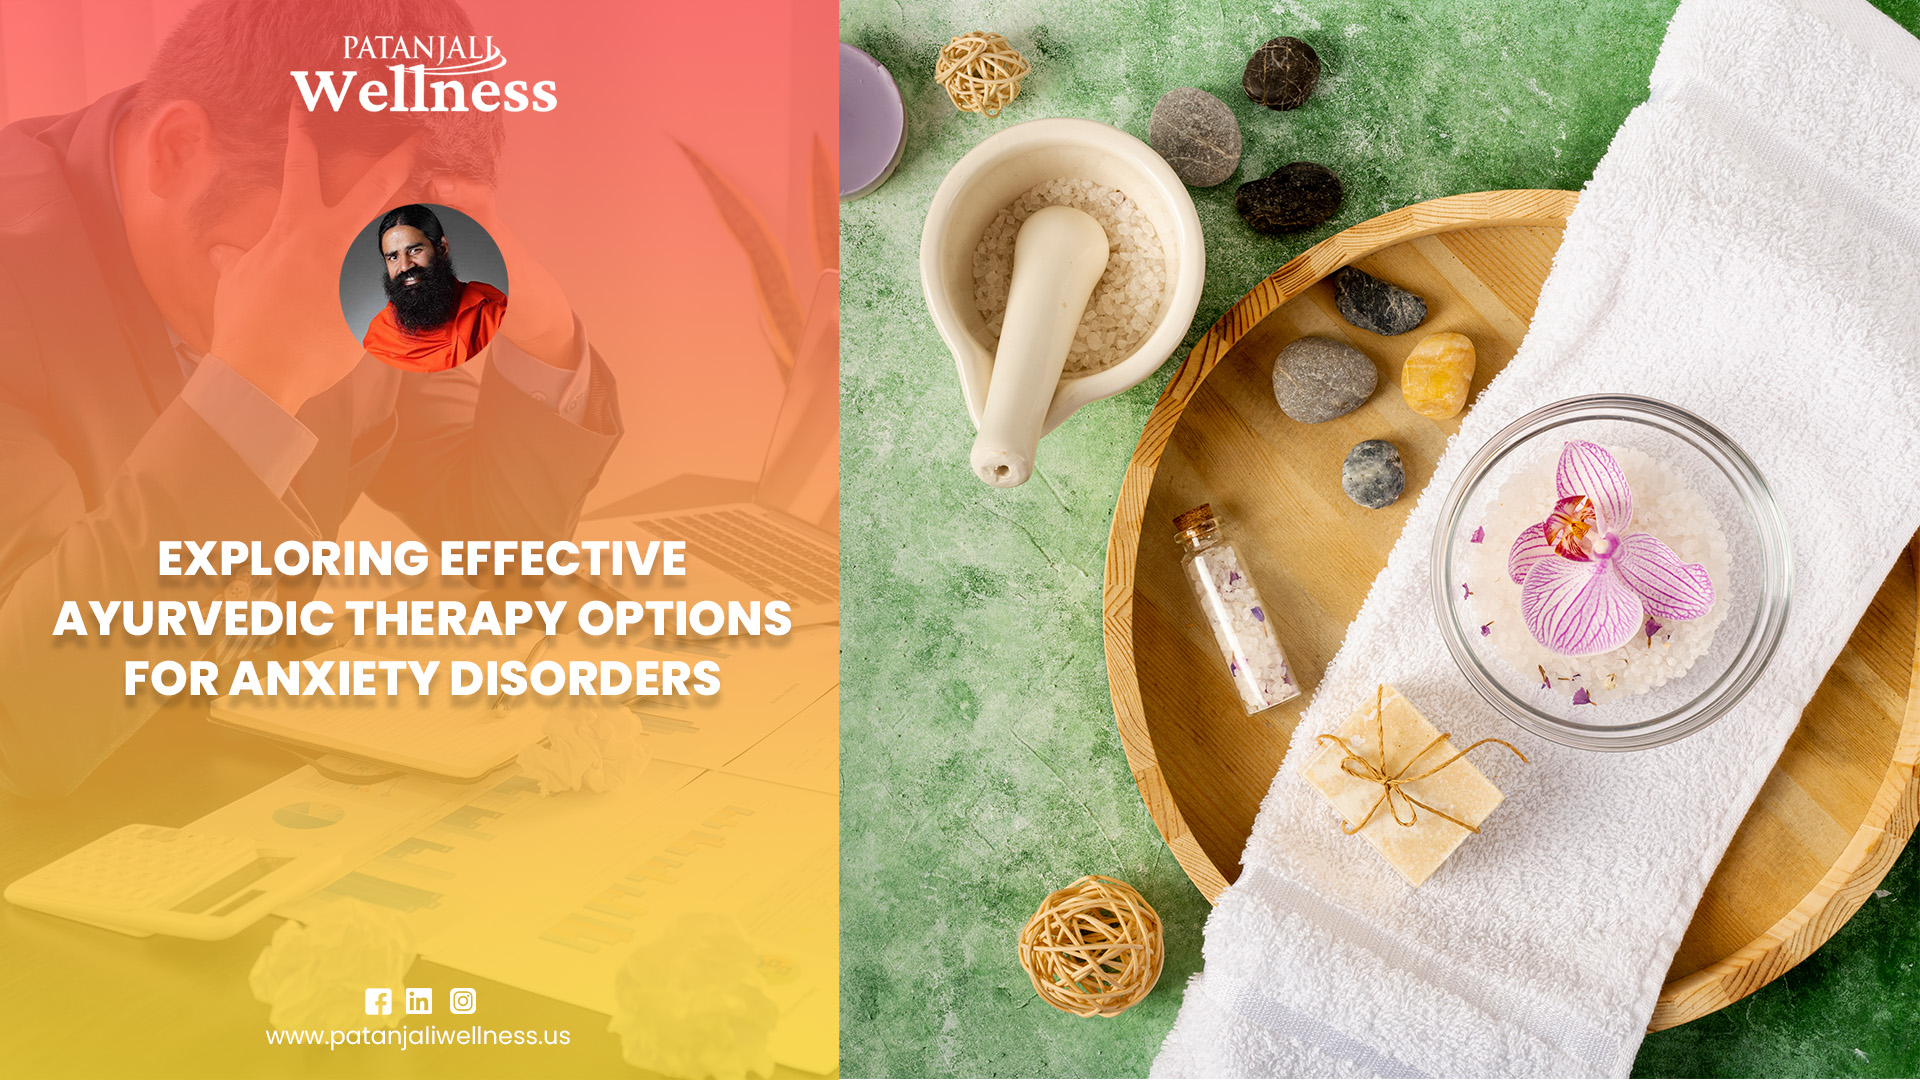 Ayurvedic Therapy Options for Anxiety Disorders